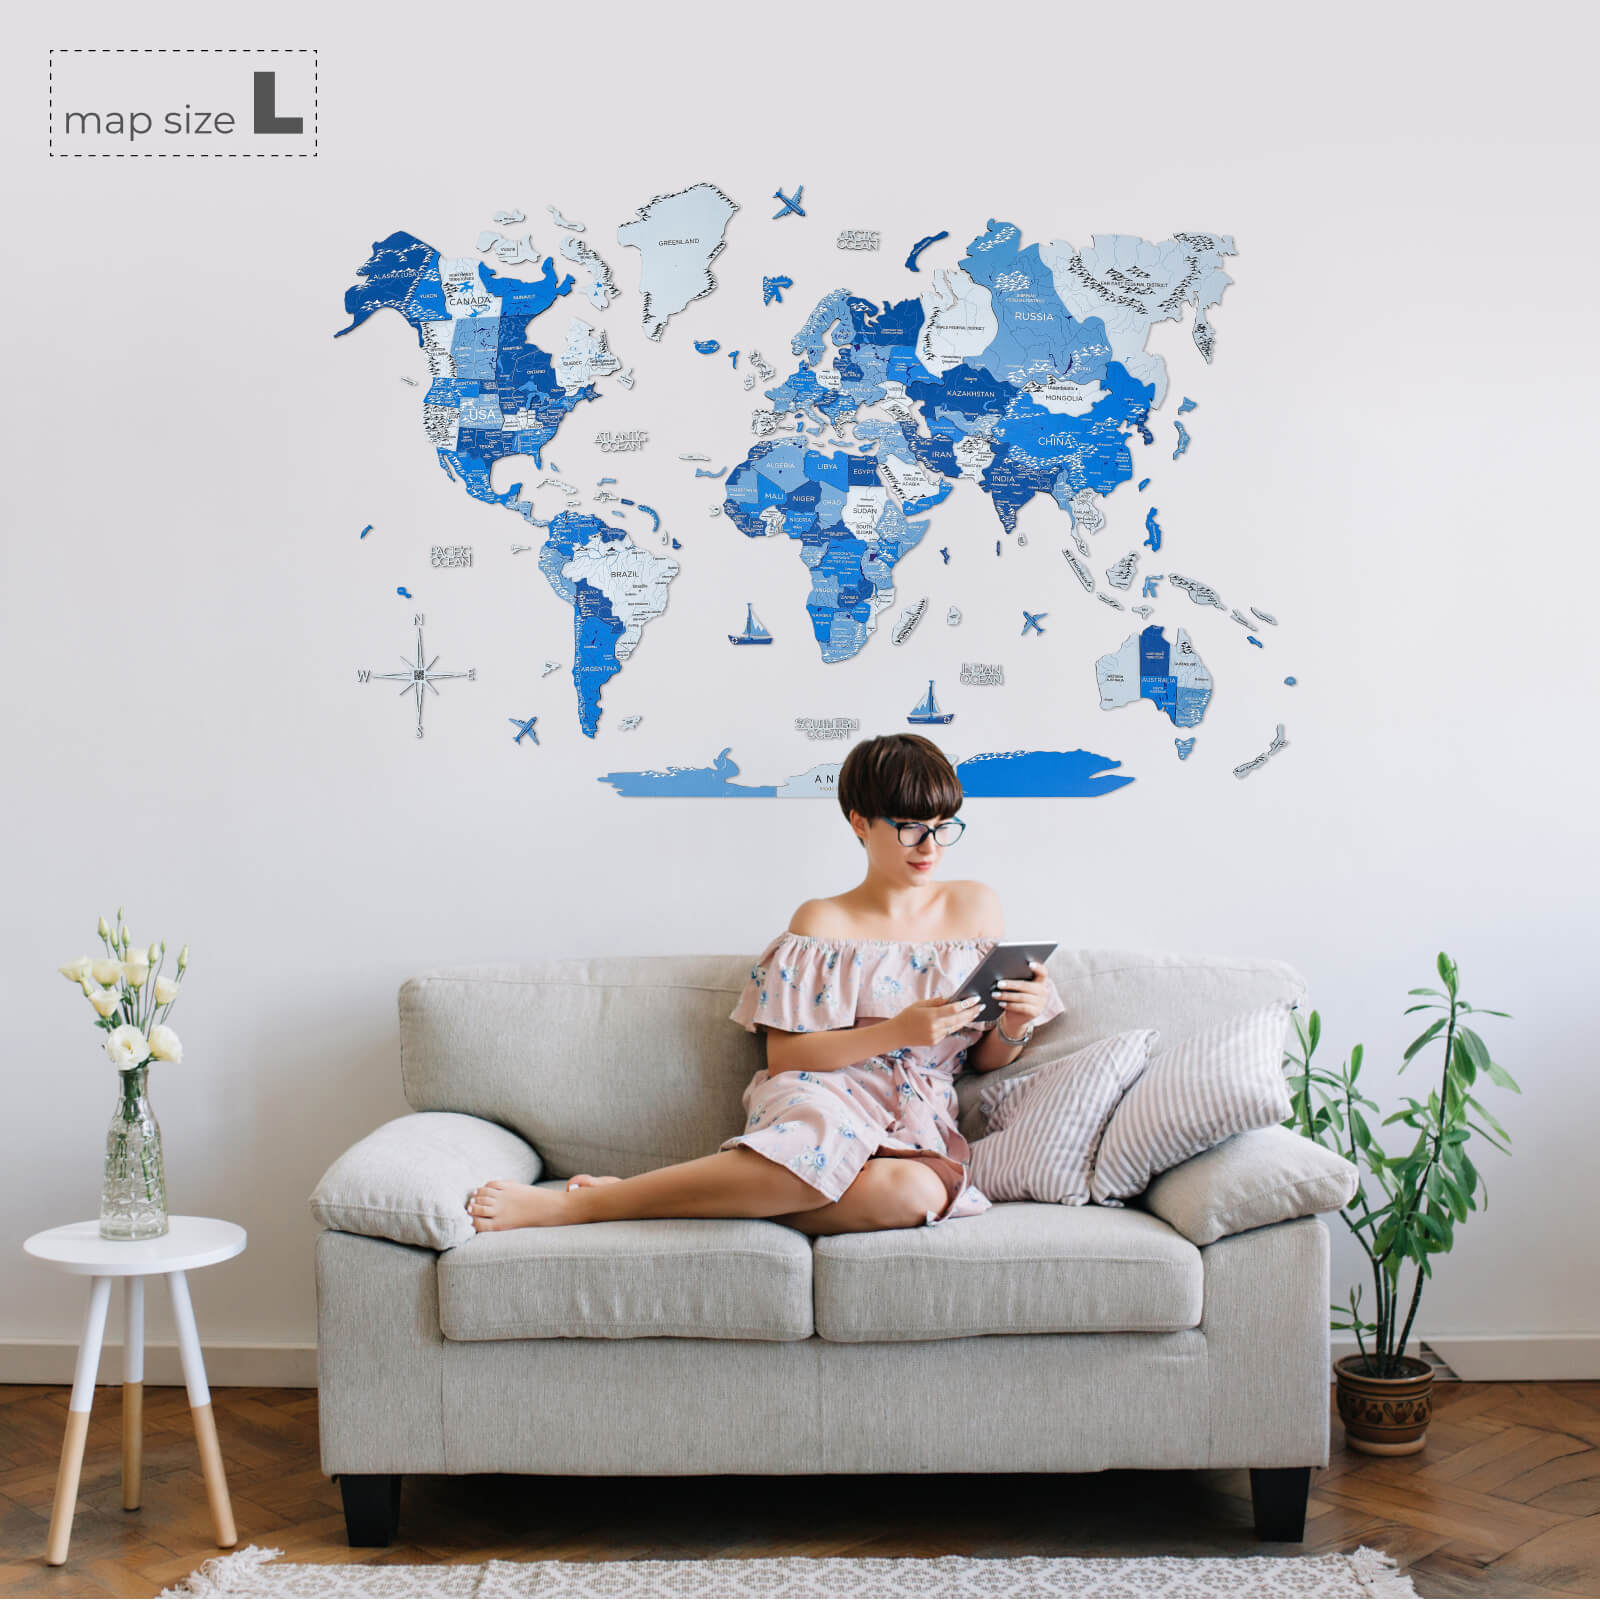 Wall Stickers, Wall Sticker for Living Room -Bedroom - Office - Home Hall  Decor